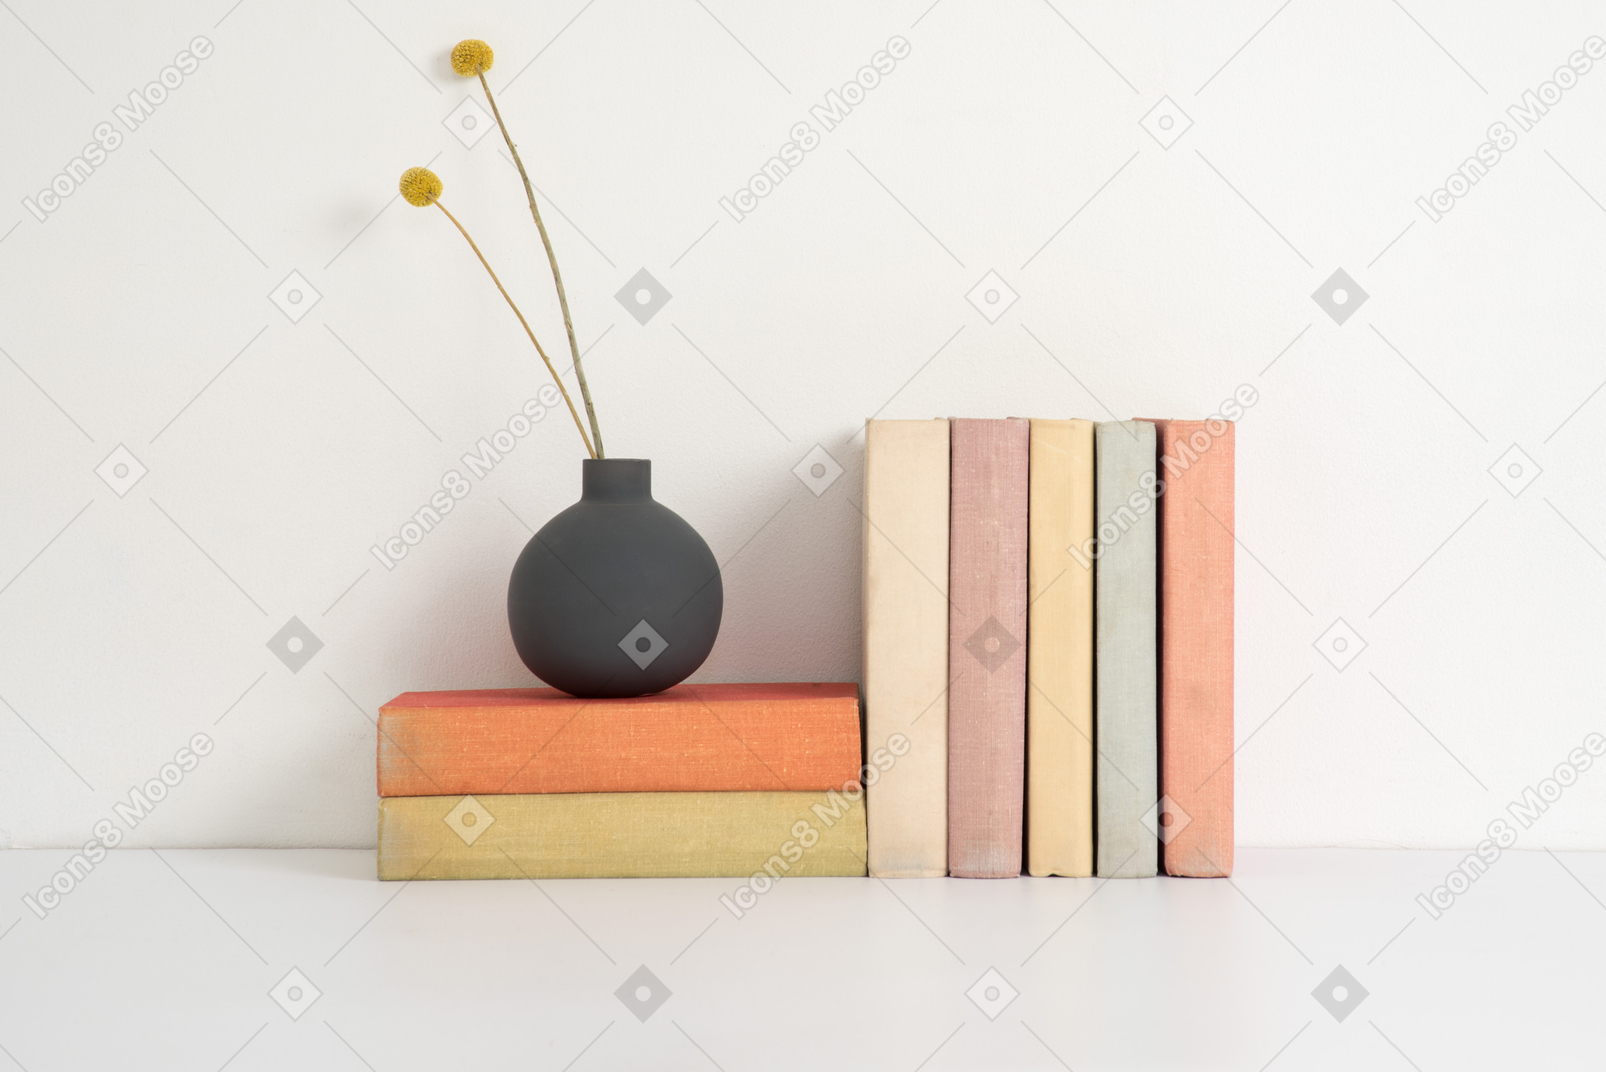 Ceramic vase with dried flowers on a stack of books